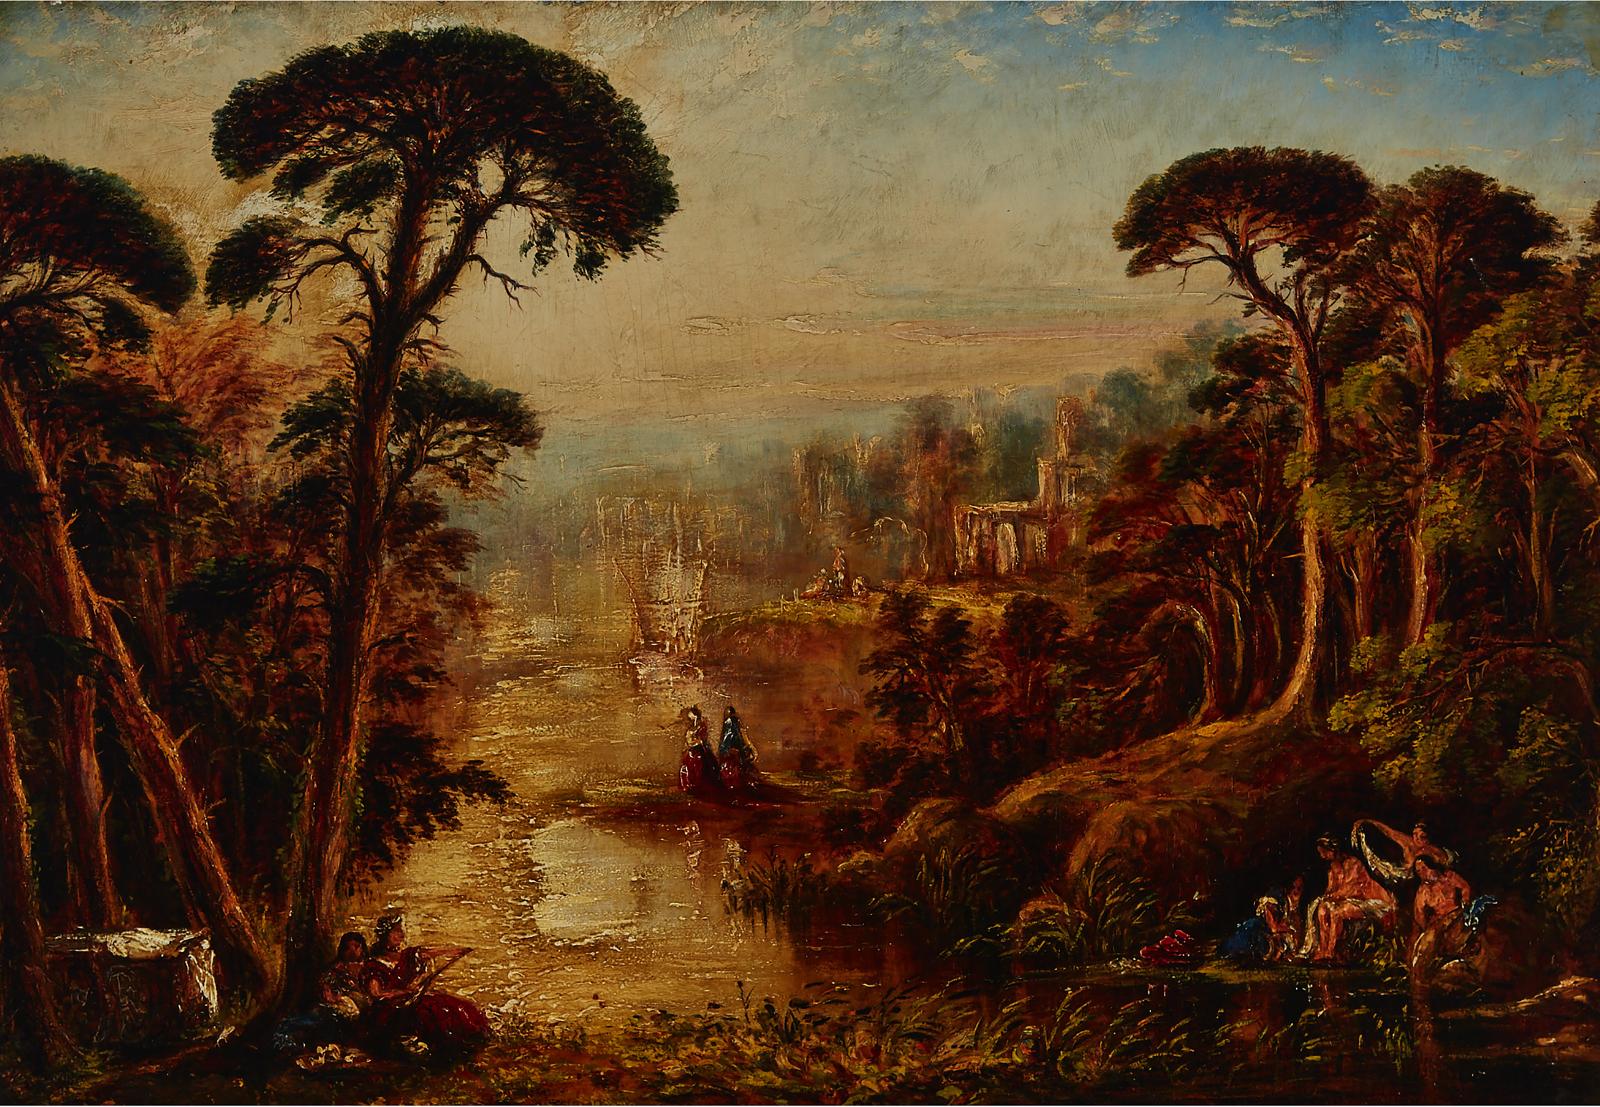 Hudson River School - Imaginary Landscape With Ruins, Elegant Figures And Native Americans Playing Musical Instruments